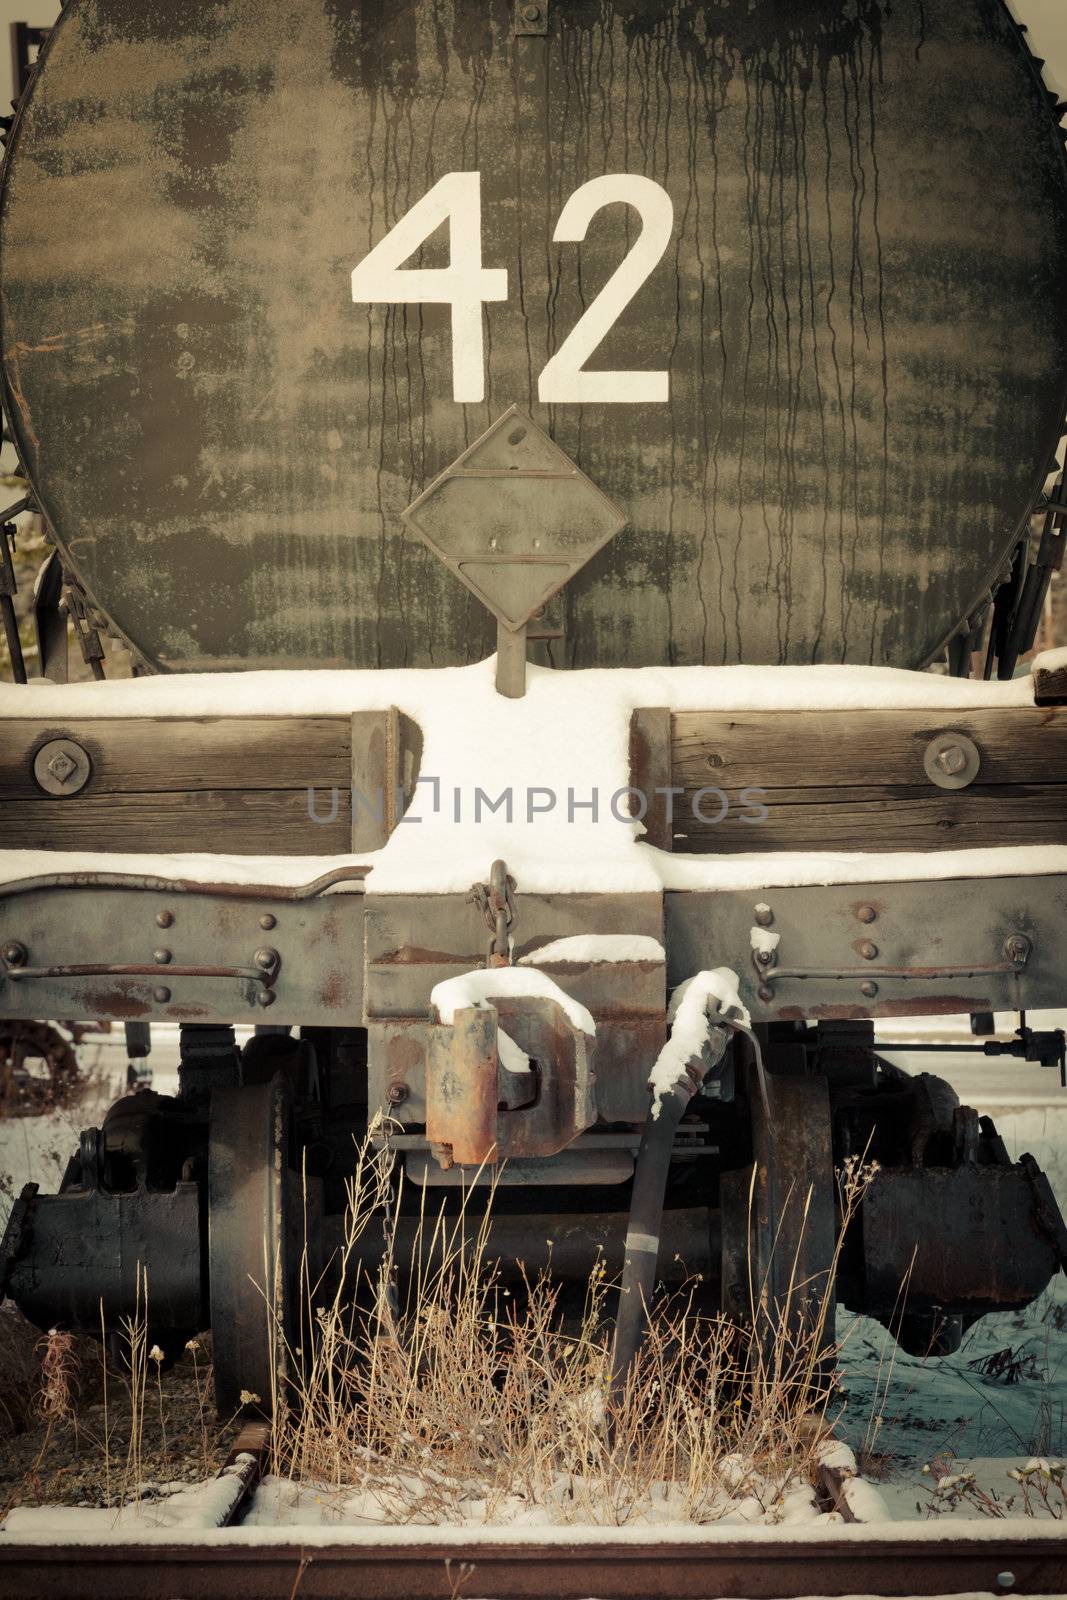 Mobile photography toned old obsolete railway car by PiLens